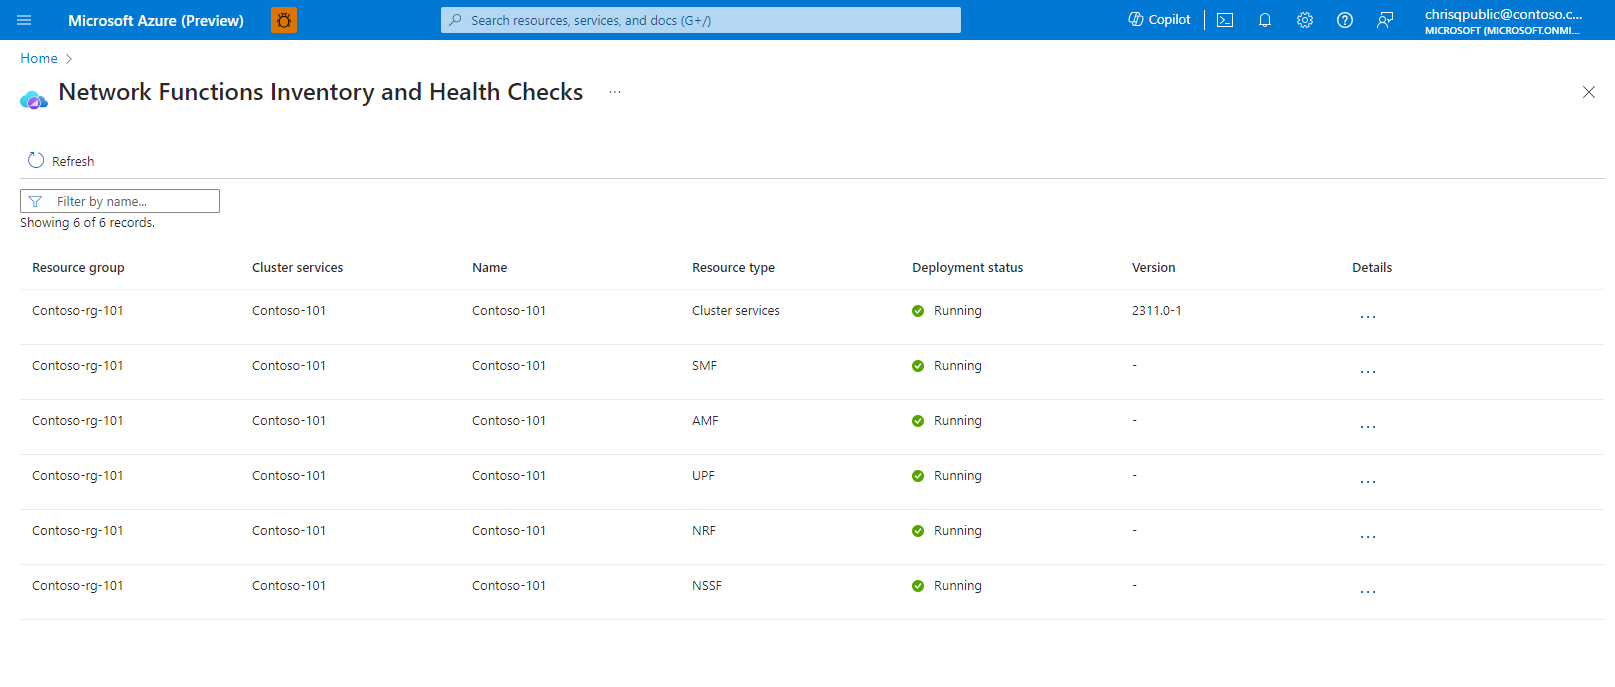 screenshot displaying the Azure Operator 5G Core health check and network functions inventory. A column listing deployment status indicates the status of each resource deployed.